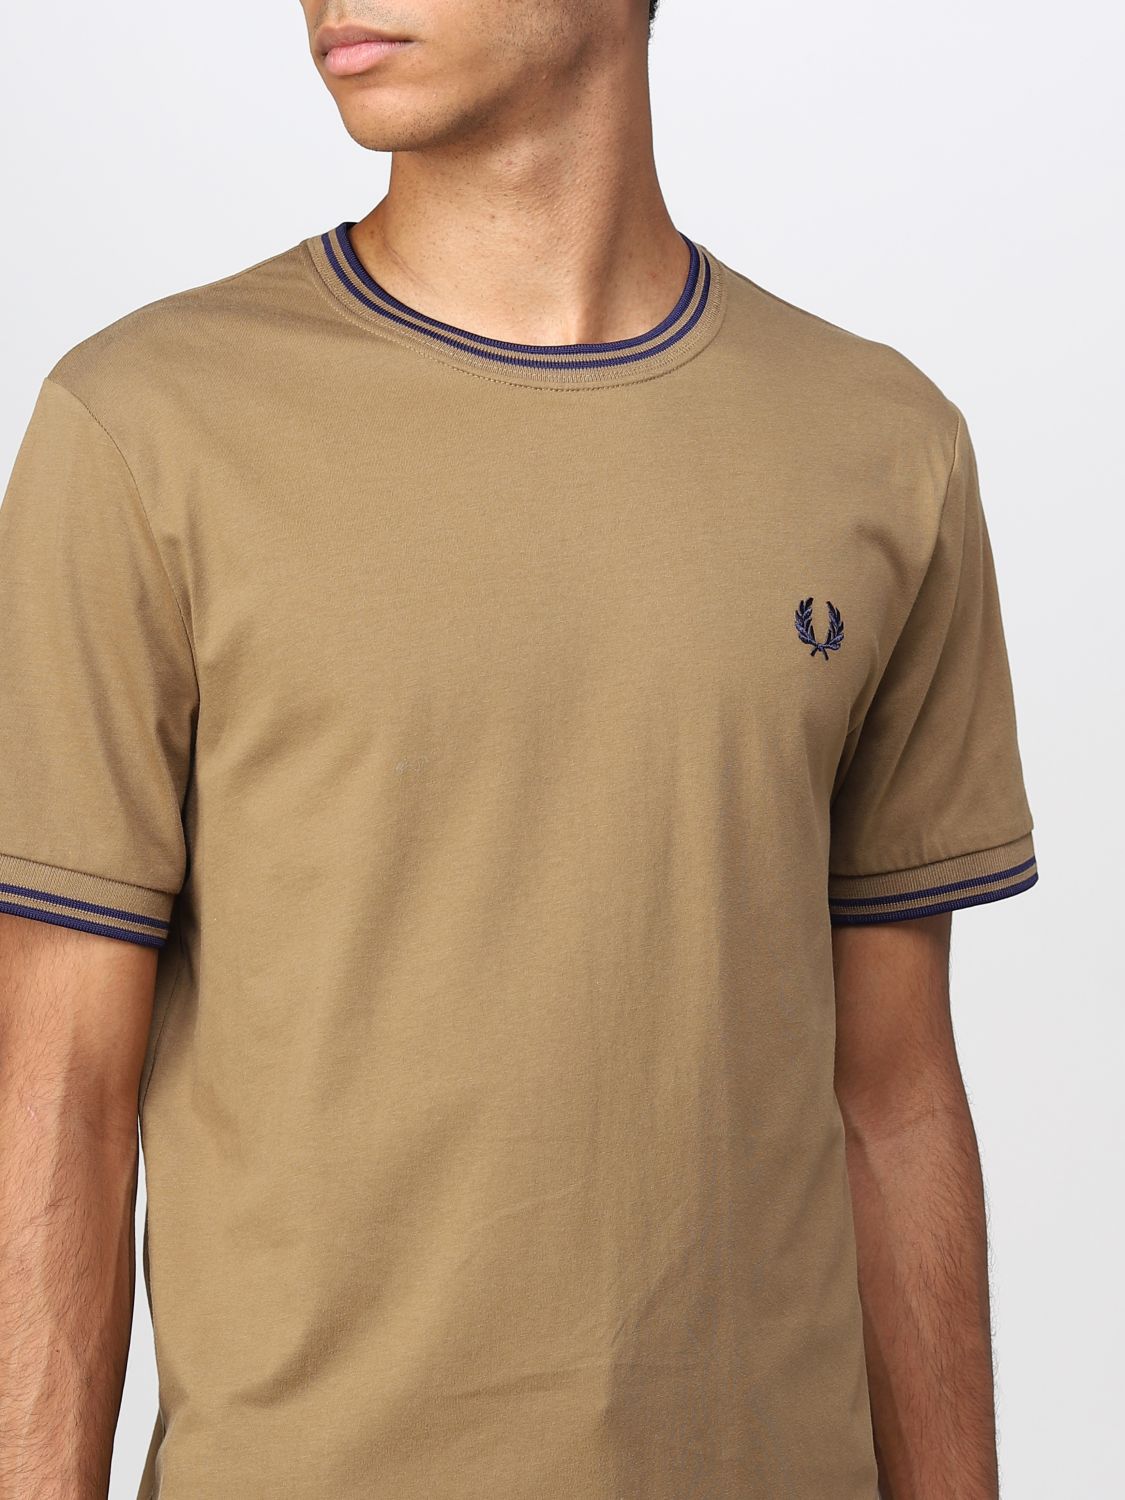 Camiseta Fred Perry: Camiseta Fred Perry para hombre marrón 3